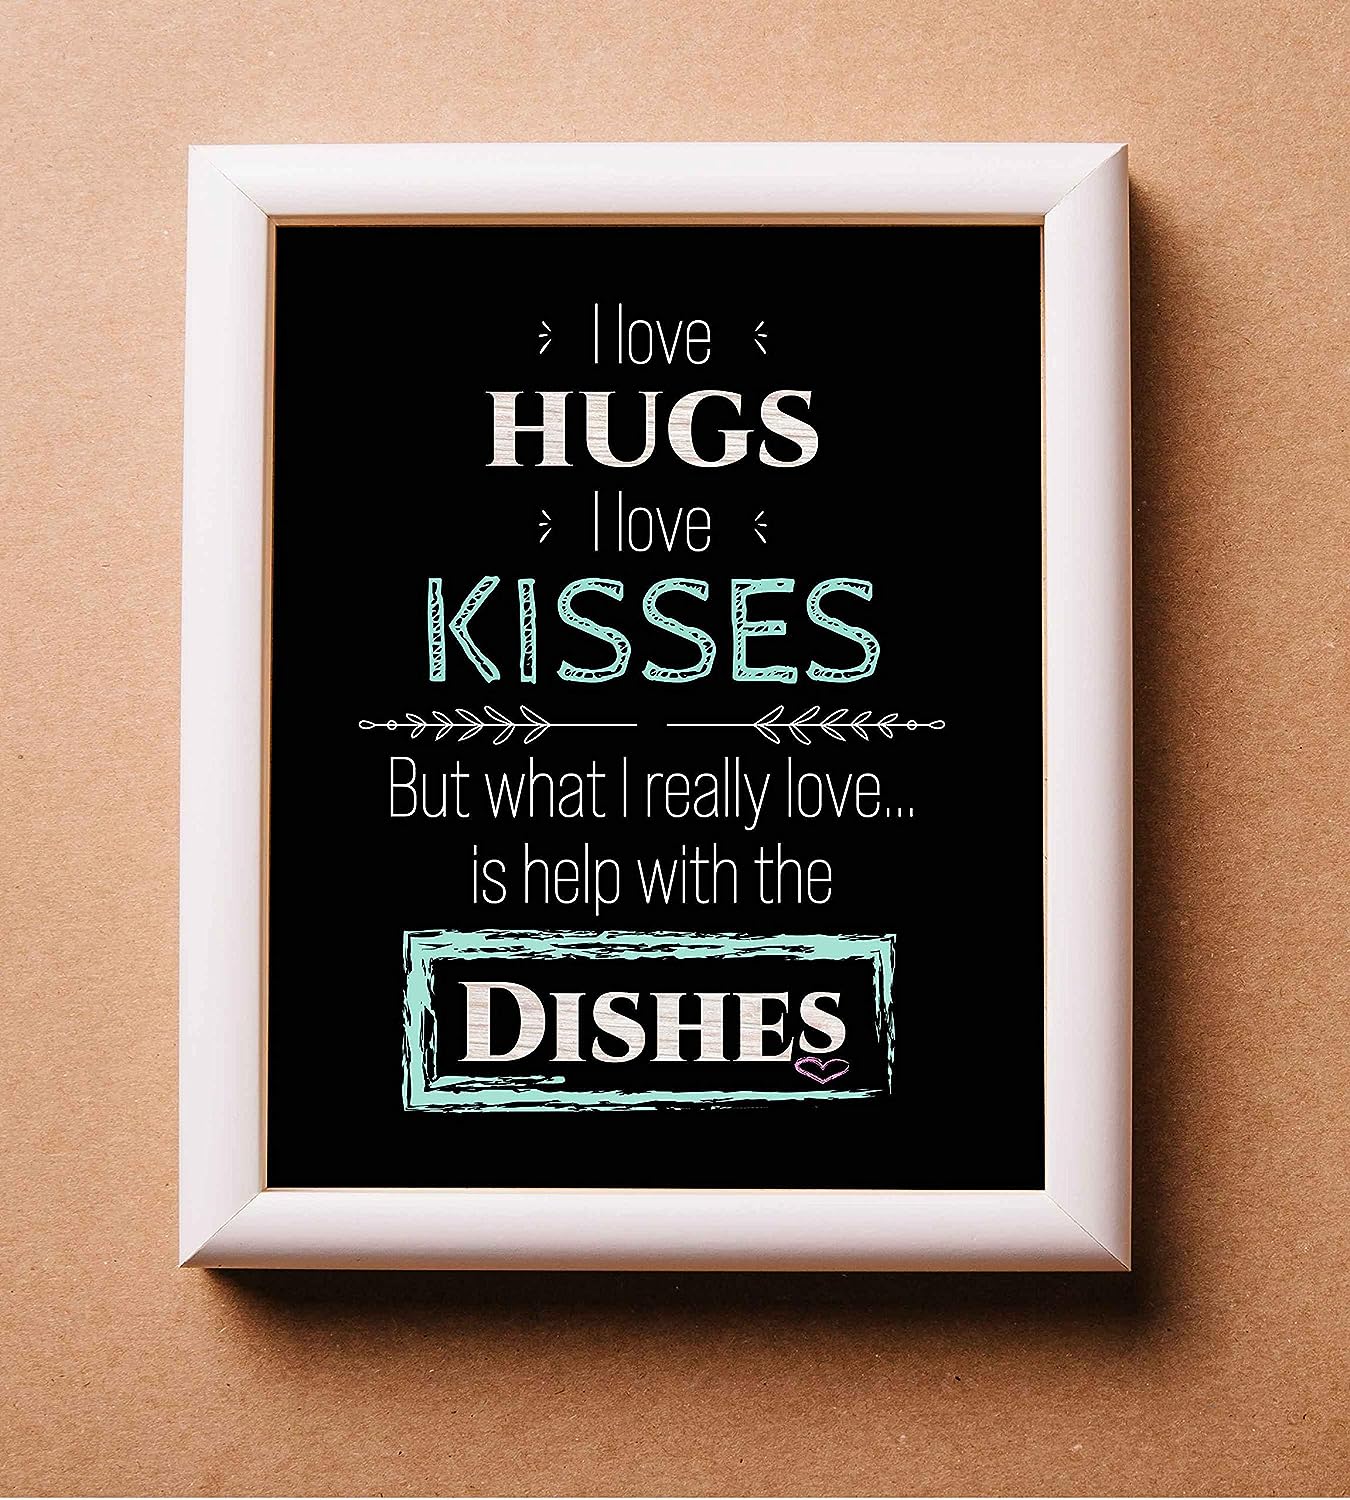 What I Really Love Is Help With the Dishes Funny Kitchen Sign- 8 x 10" Typographic Wall Art Print-Ready to Frame. Humorous Home-Kitchen-Guest House-B&B Decor. Great Novelty Gift for All Cooks!